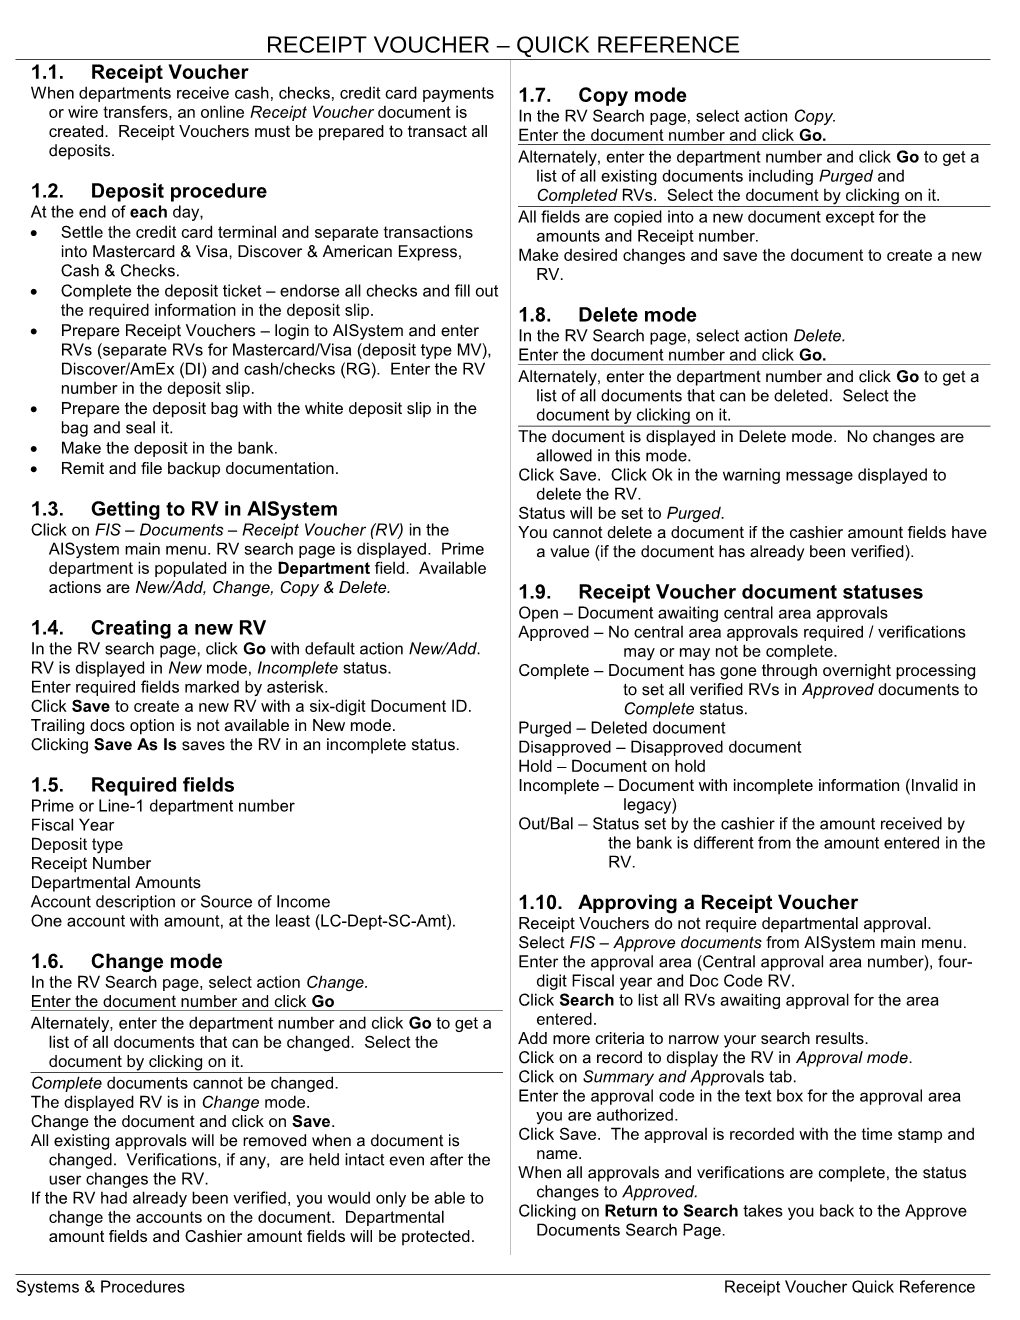 Travel Advance Quick Reference